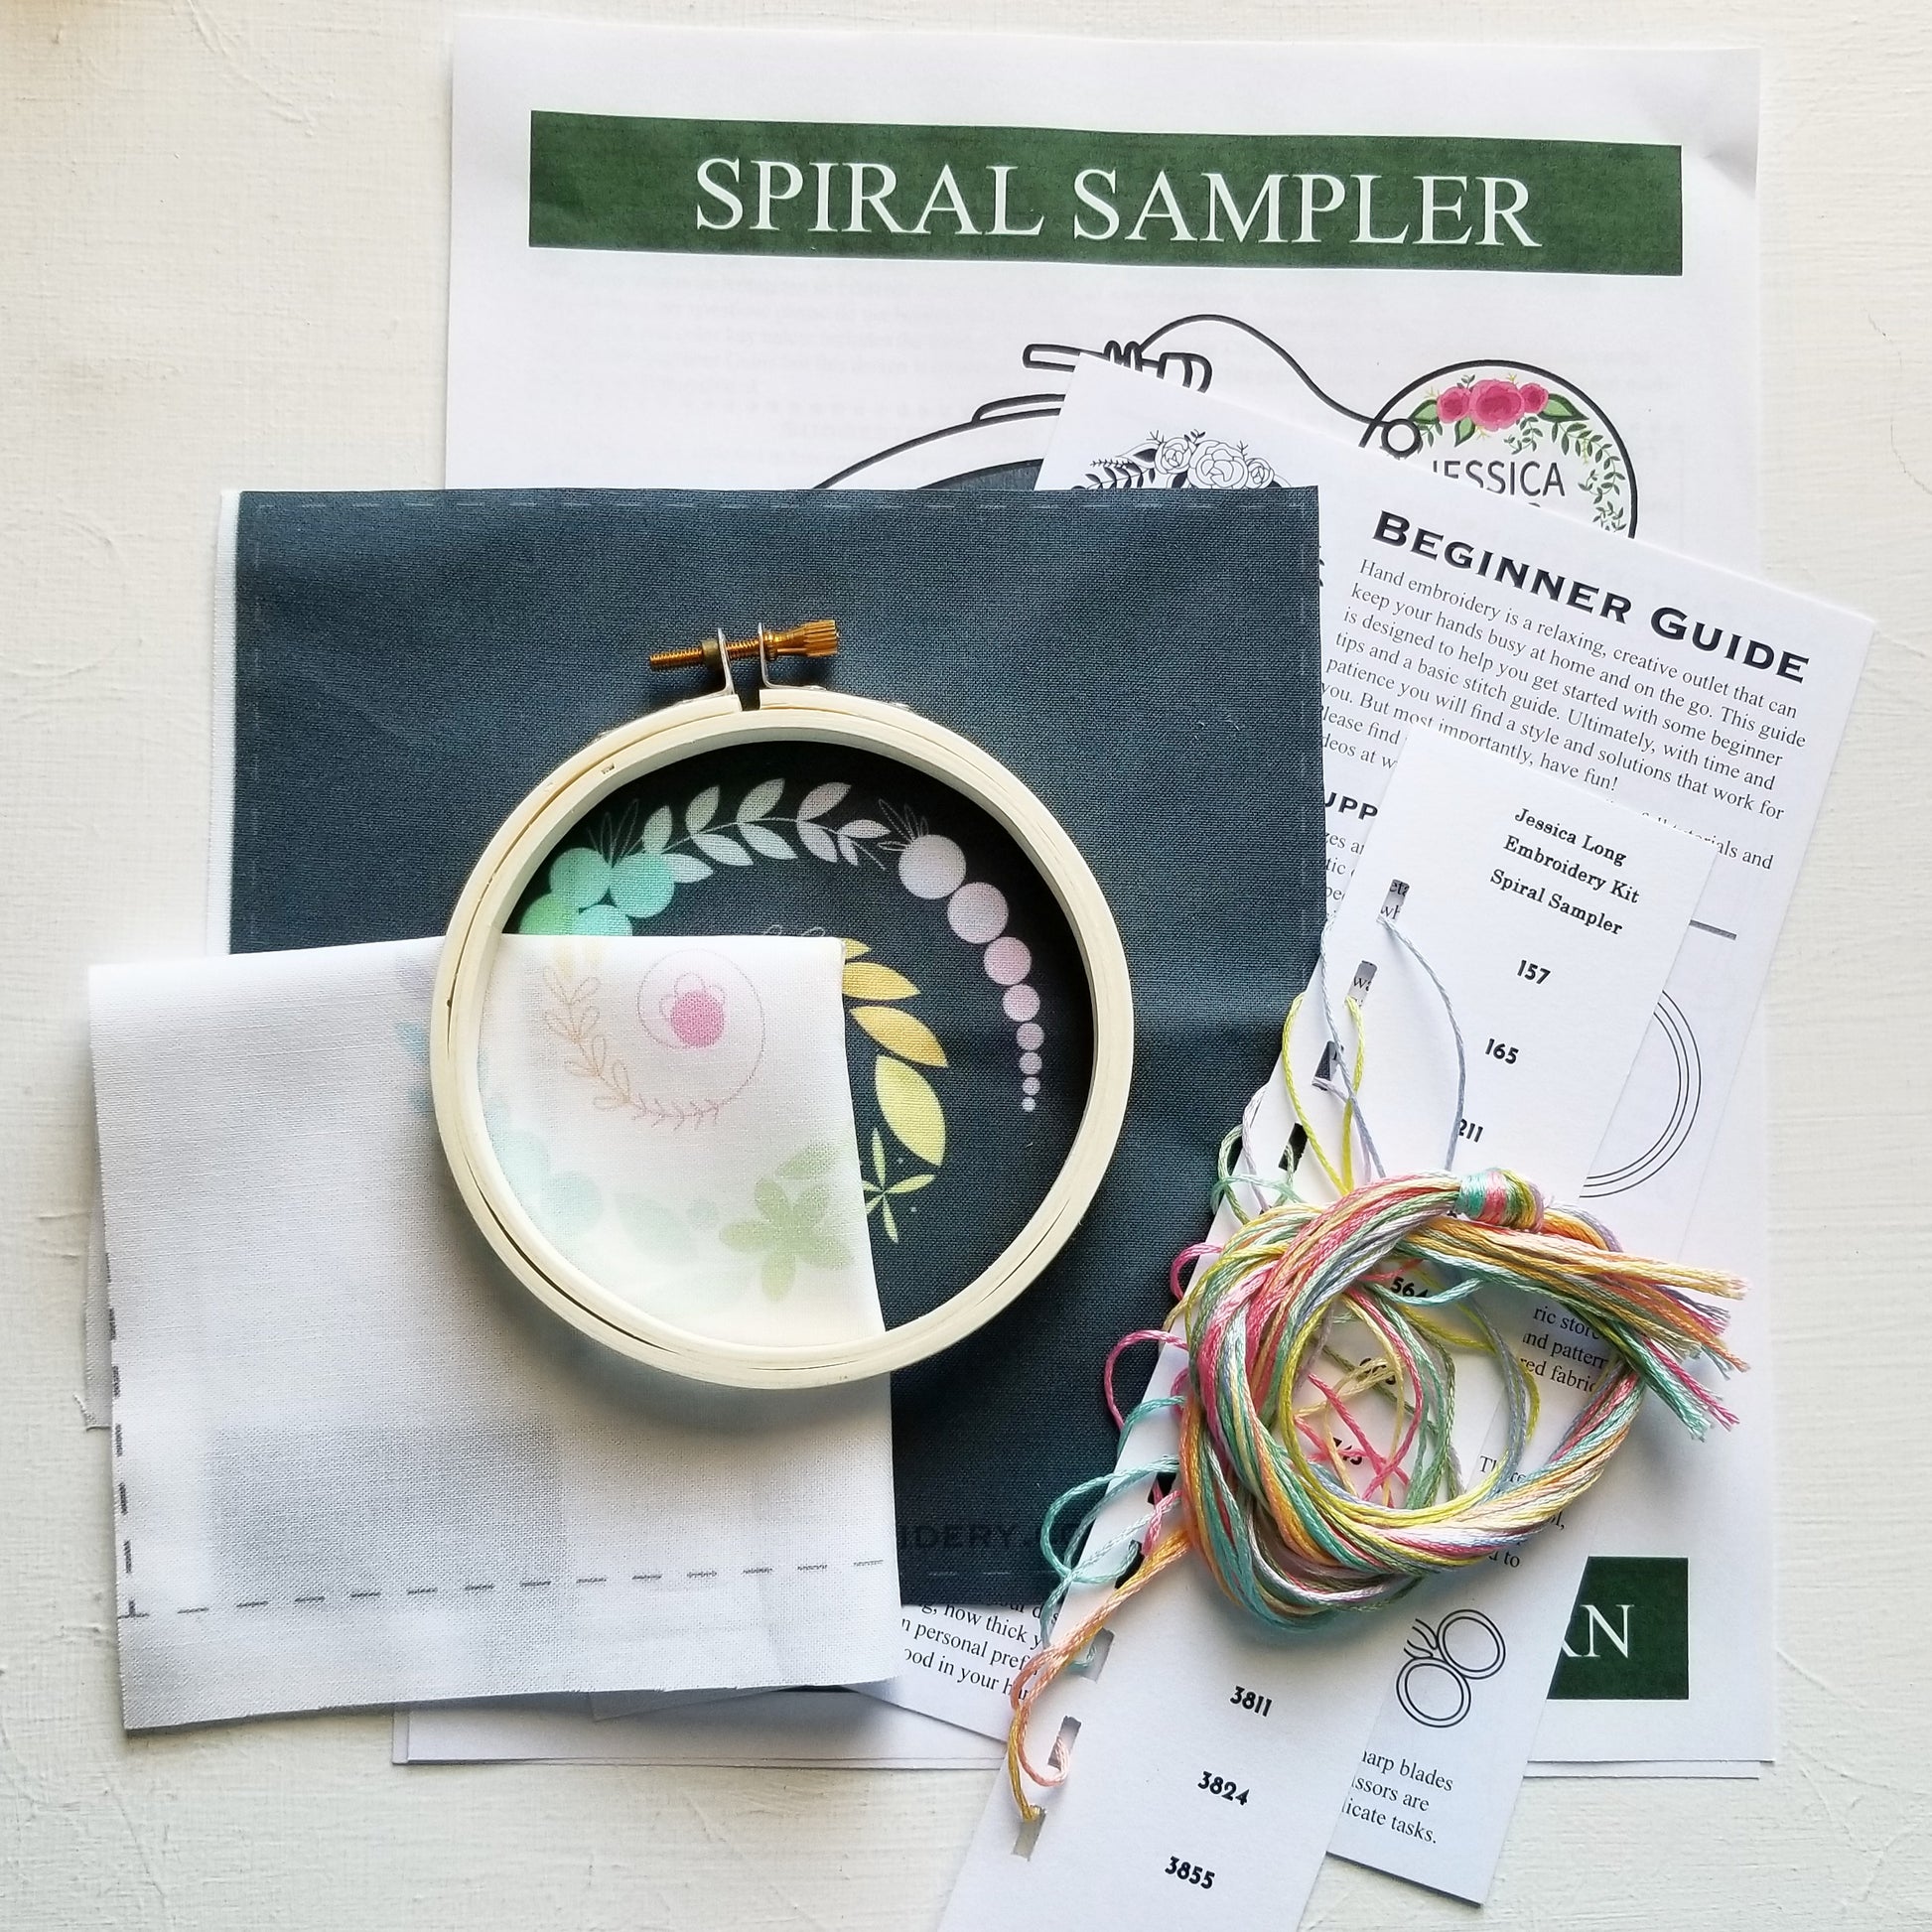 Jessica Long Embroidery Kit Blissful Blooms (Beginner) - The Websters